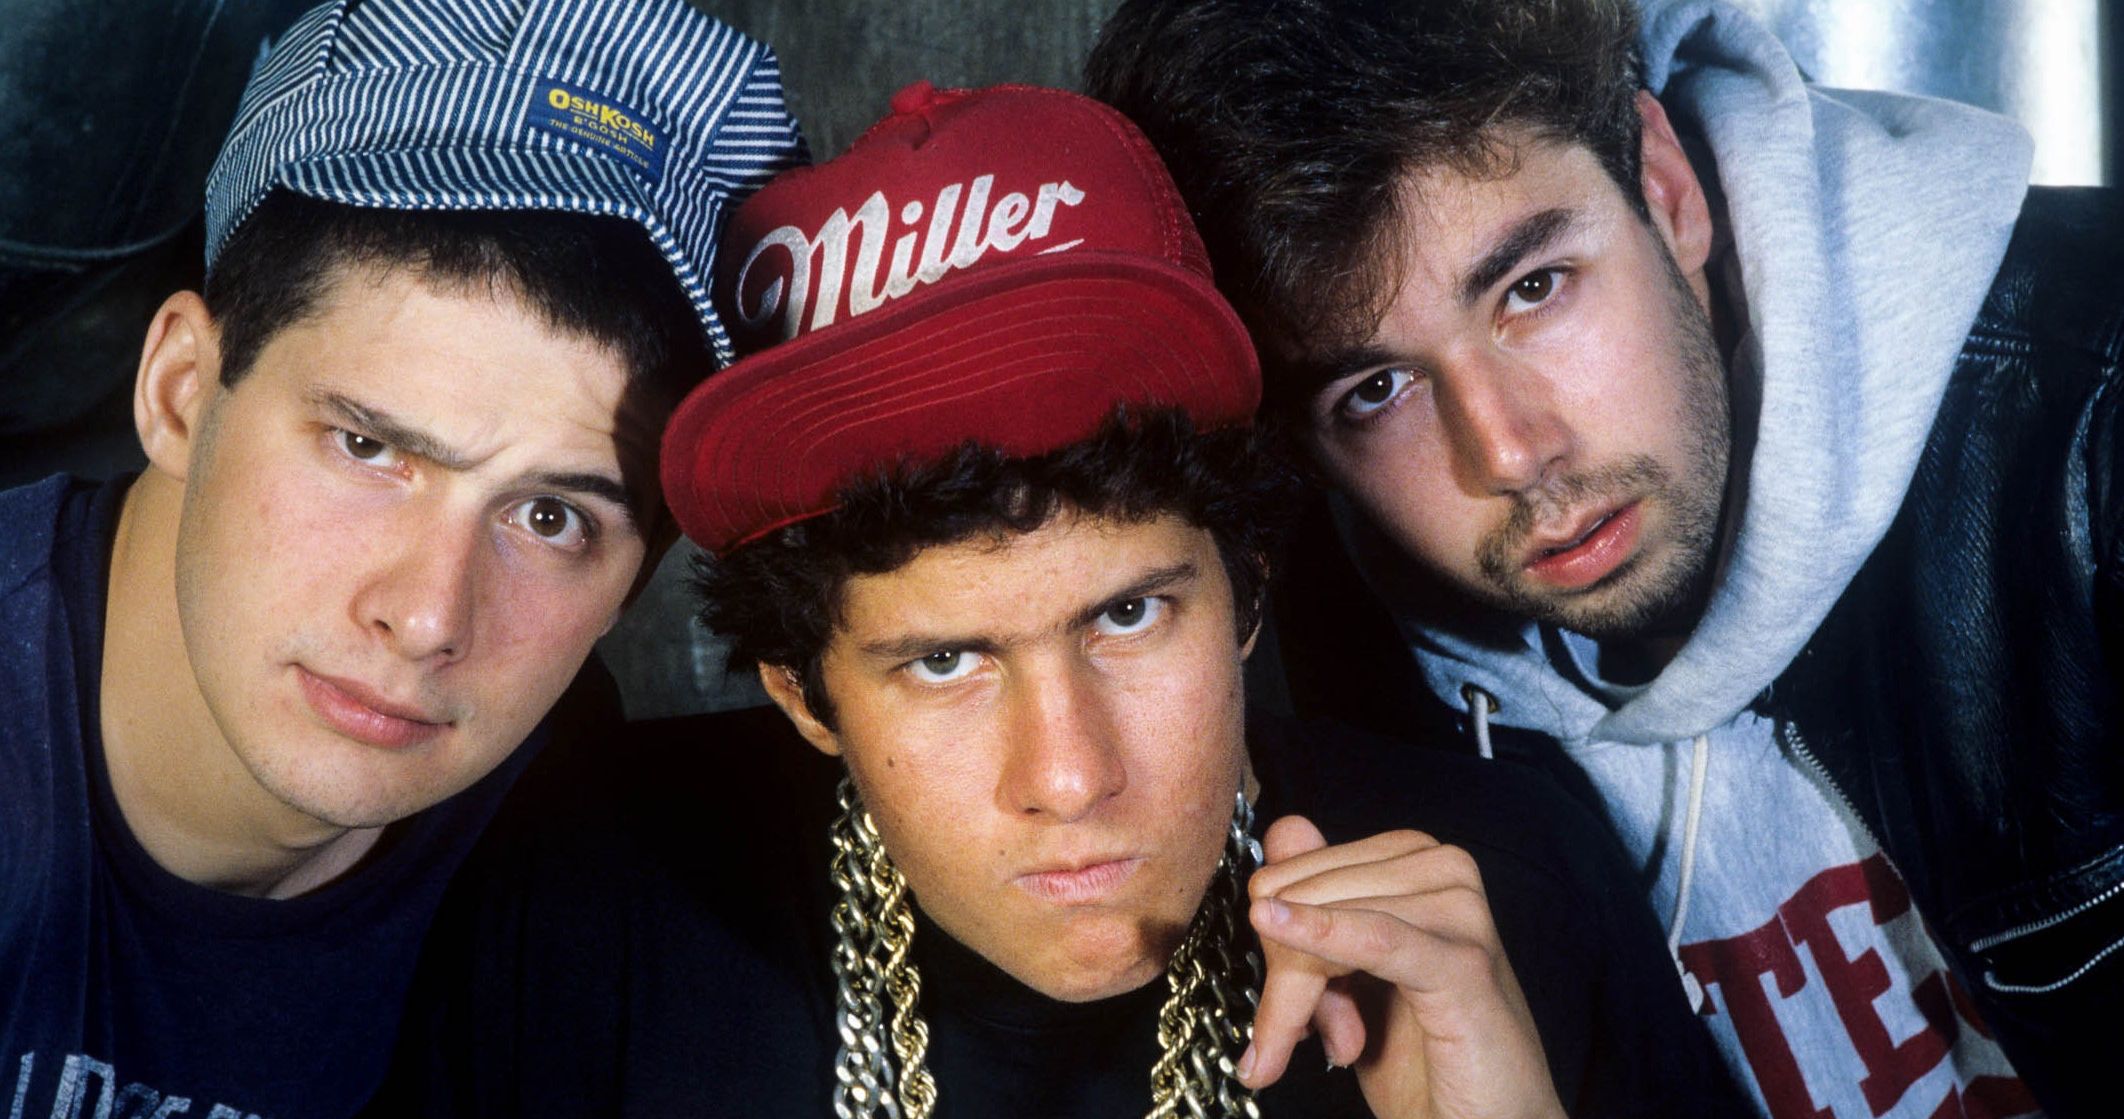 Beastie Boys Story IMAX Release Postponed, Apple TV+ Release Date Remains in Place